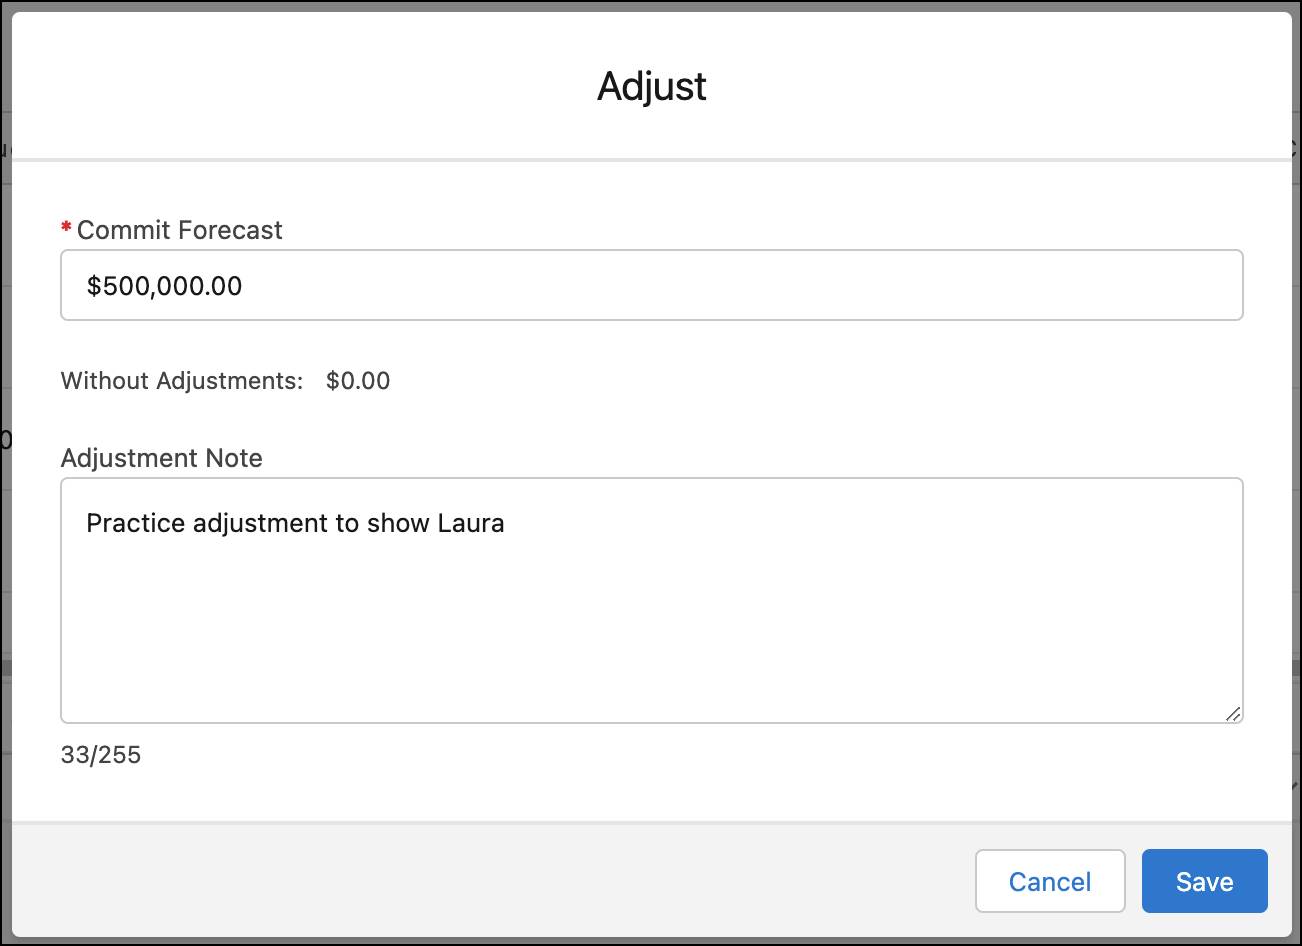 The adjust forecast dialogue with options to edit the forecast value and add notes.